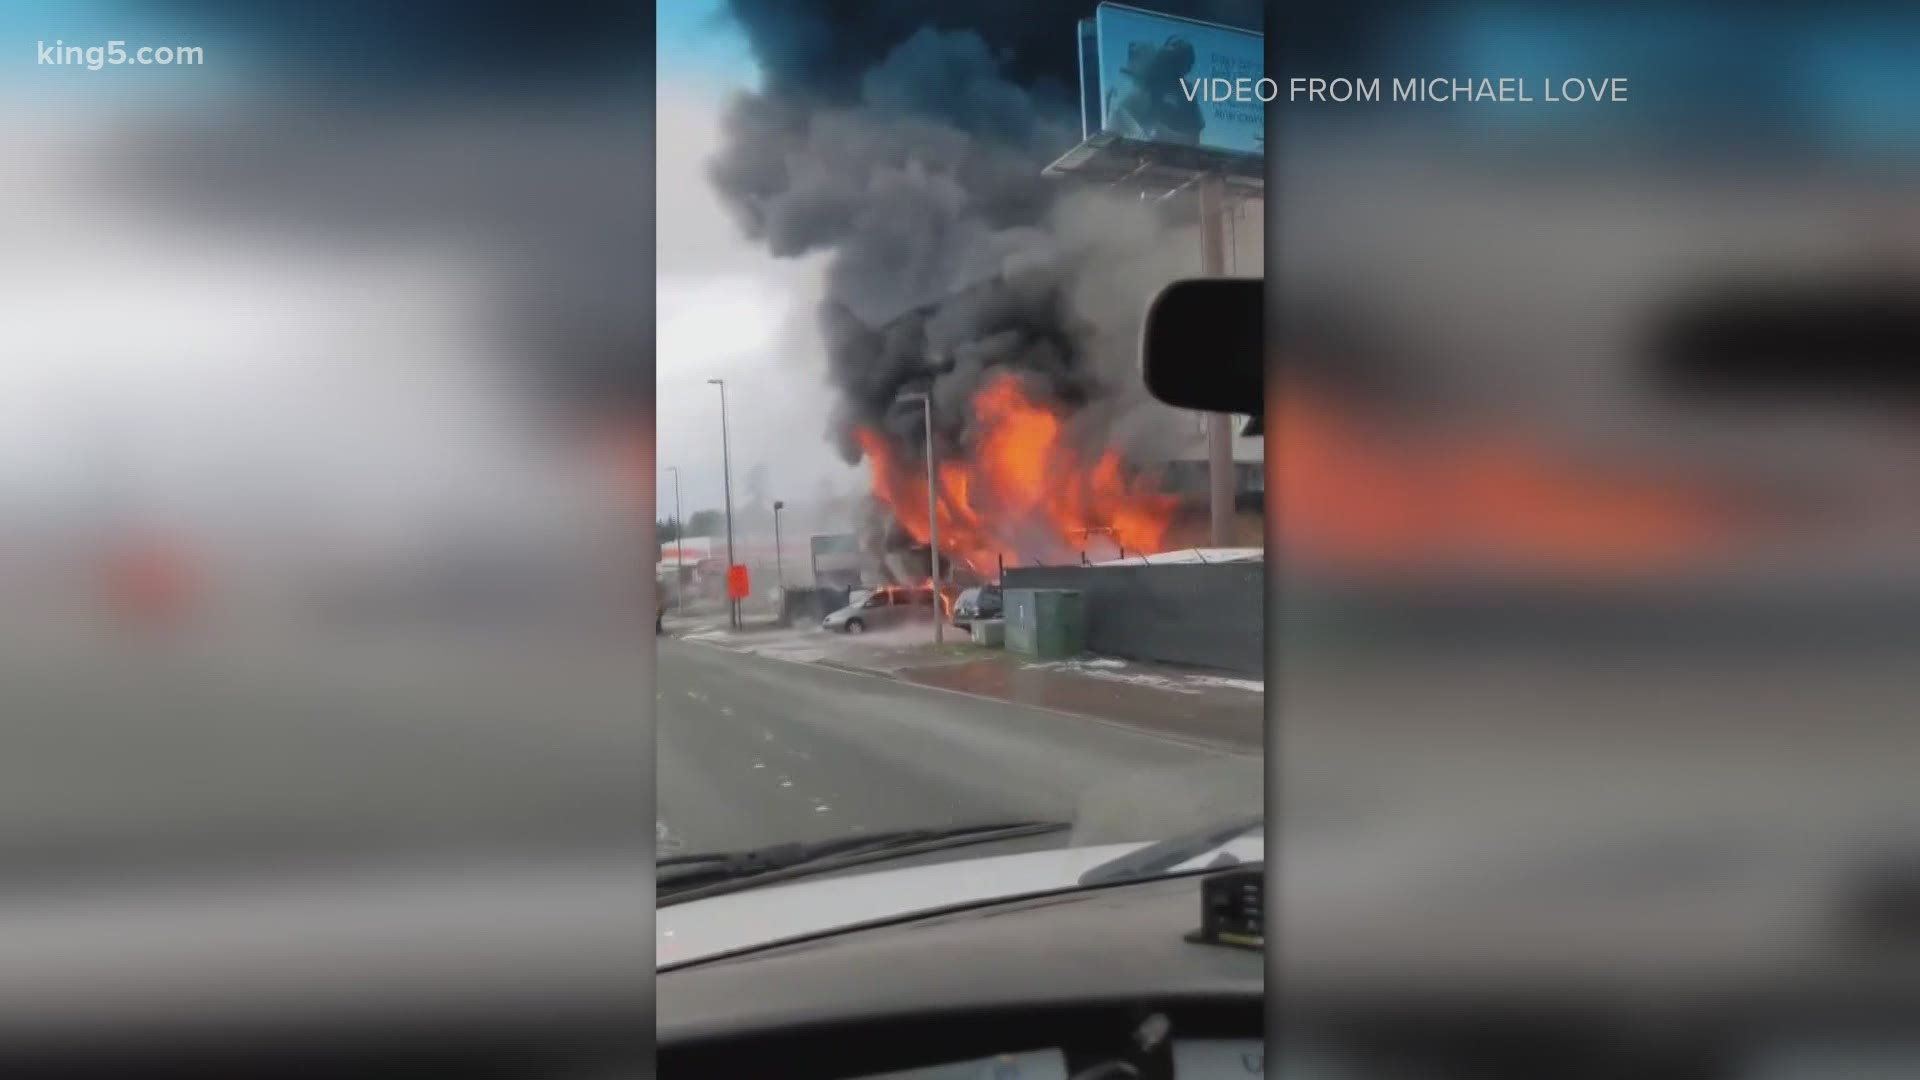 Footage from KING 5 viewer Michael Love shows flames from a commercial fire in SeaTac on Feb. 16, 2021.